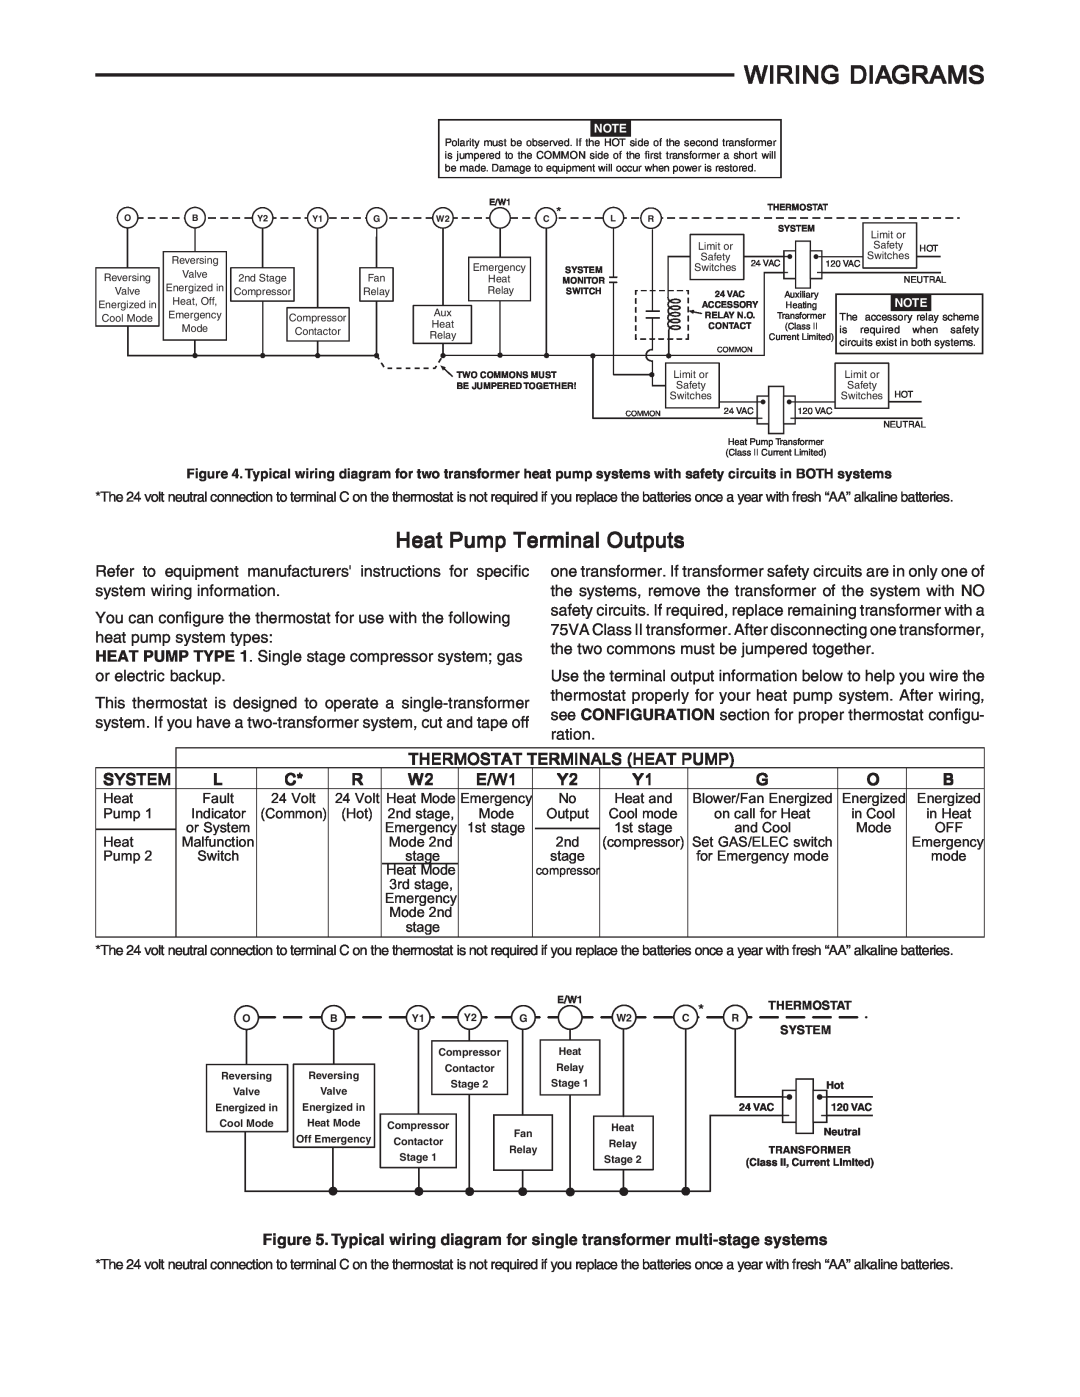 Emerson 1F83-277 installation instructions Wiring Diagrams, Heat Pump Terminal Outputs 